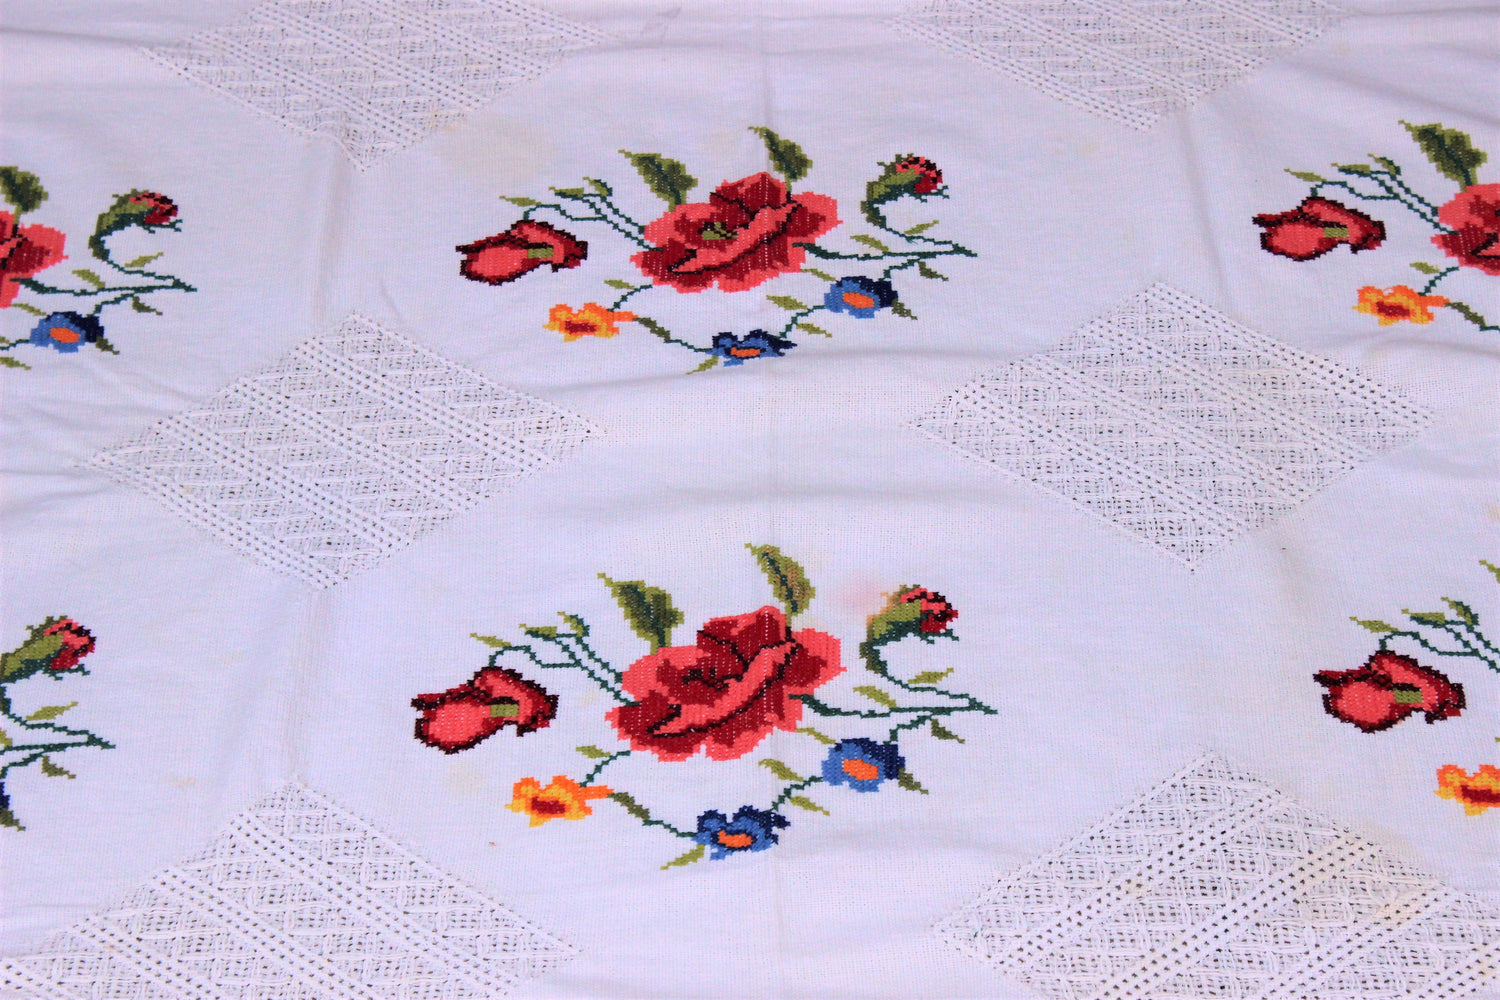 Vintage 1950s 1960s Cotton Tablecloth With Cross Stitched Flowers